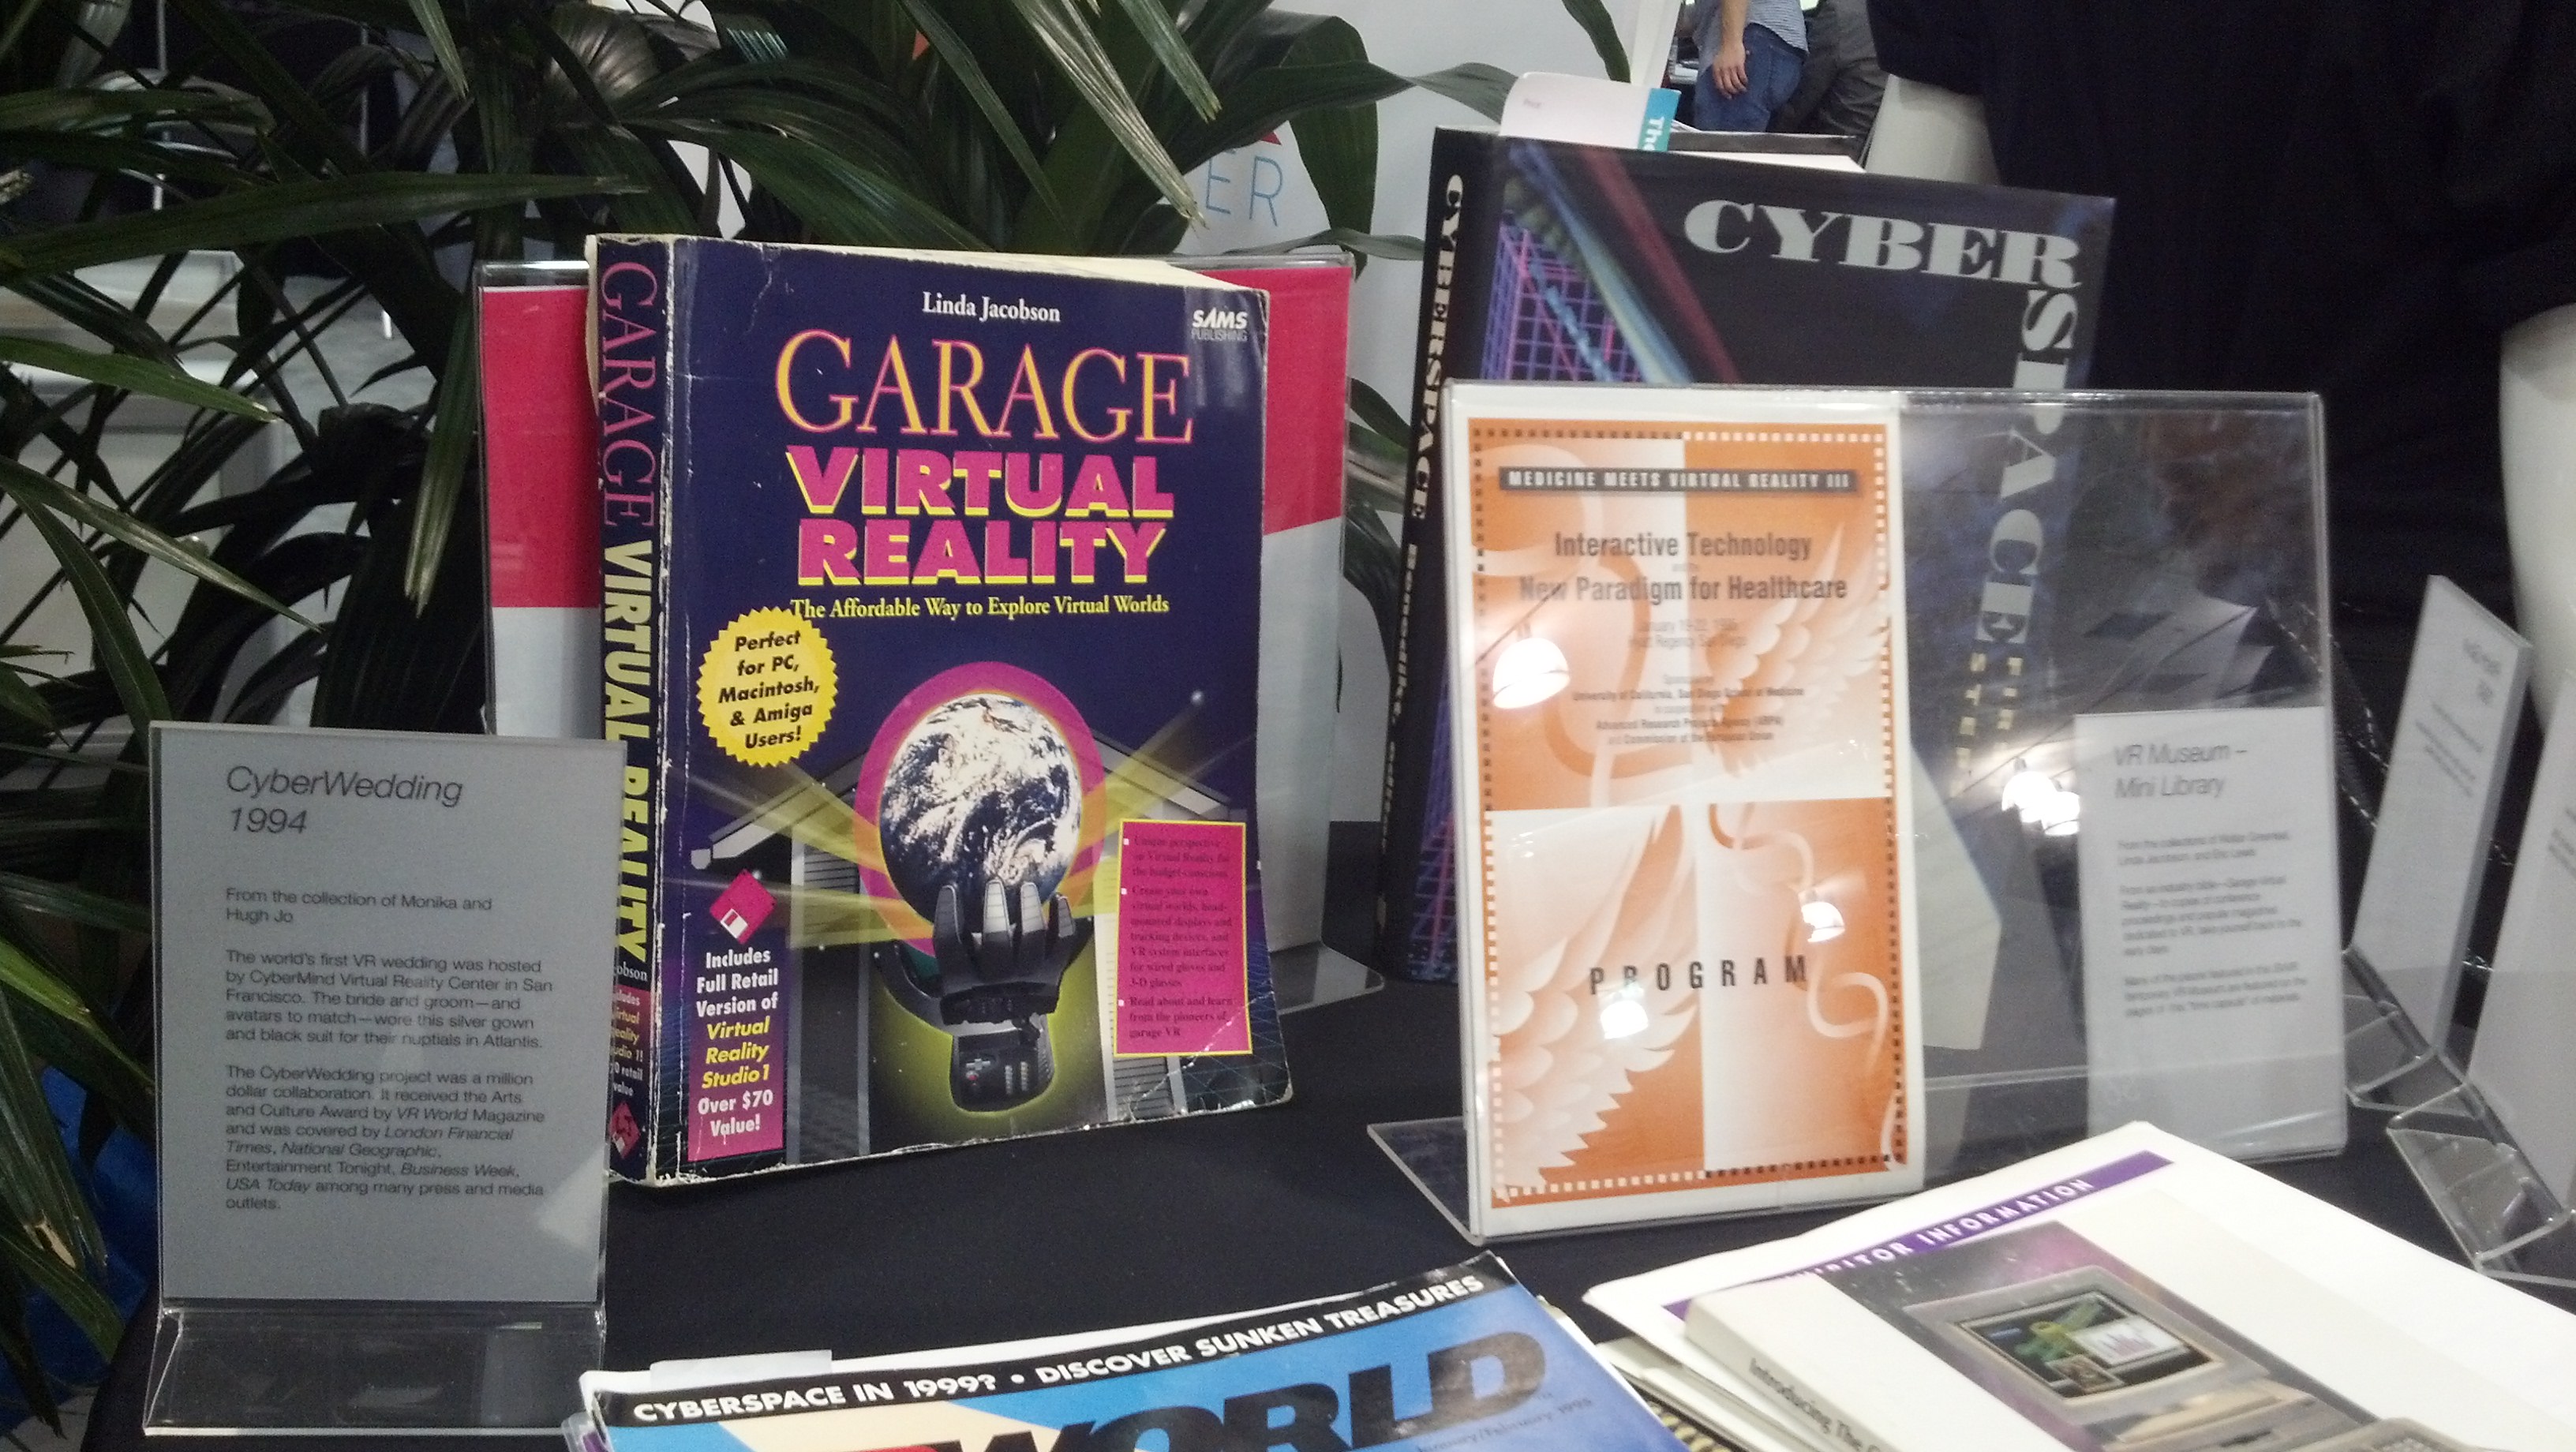 Stacks of valuable information shown at SVVR are now stored somewhere ready to be read another day 